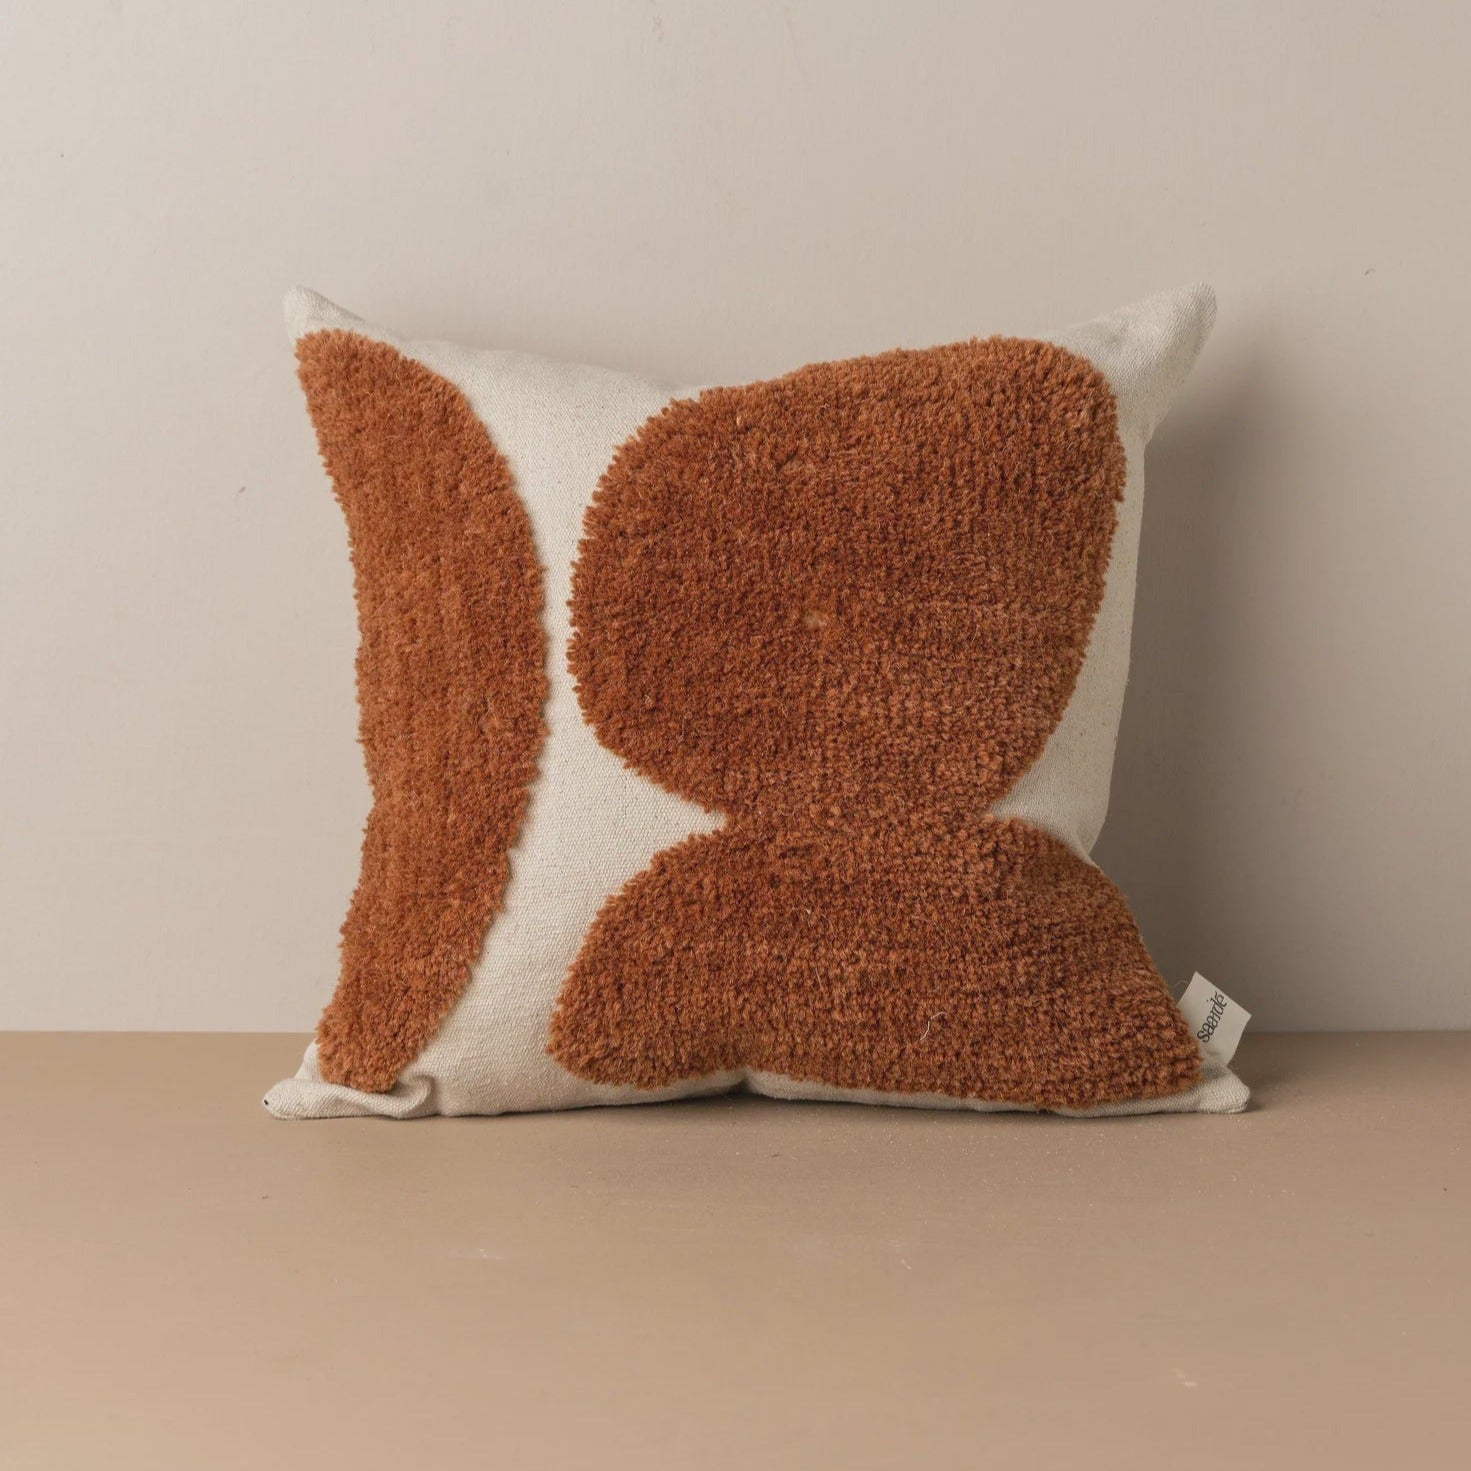 Abstract Square Cushion - Terracotta